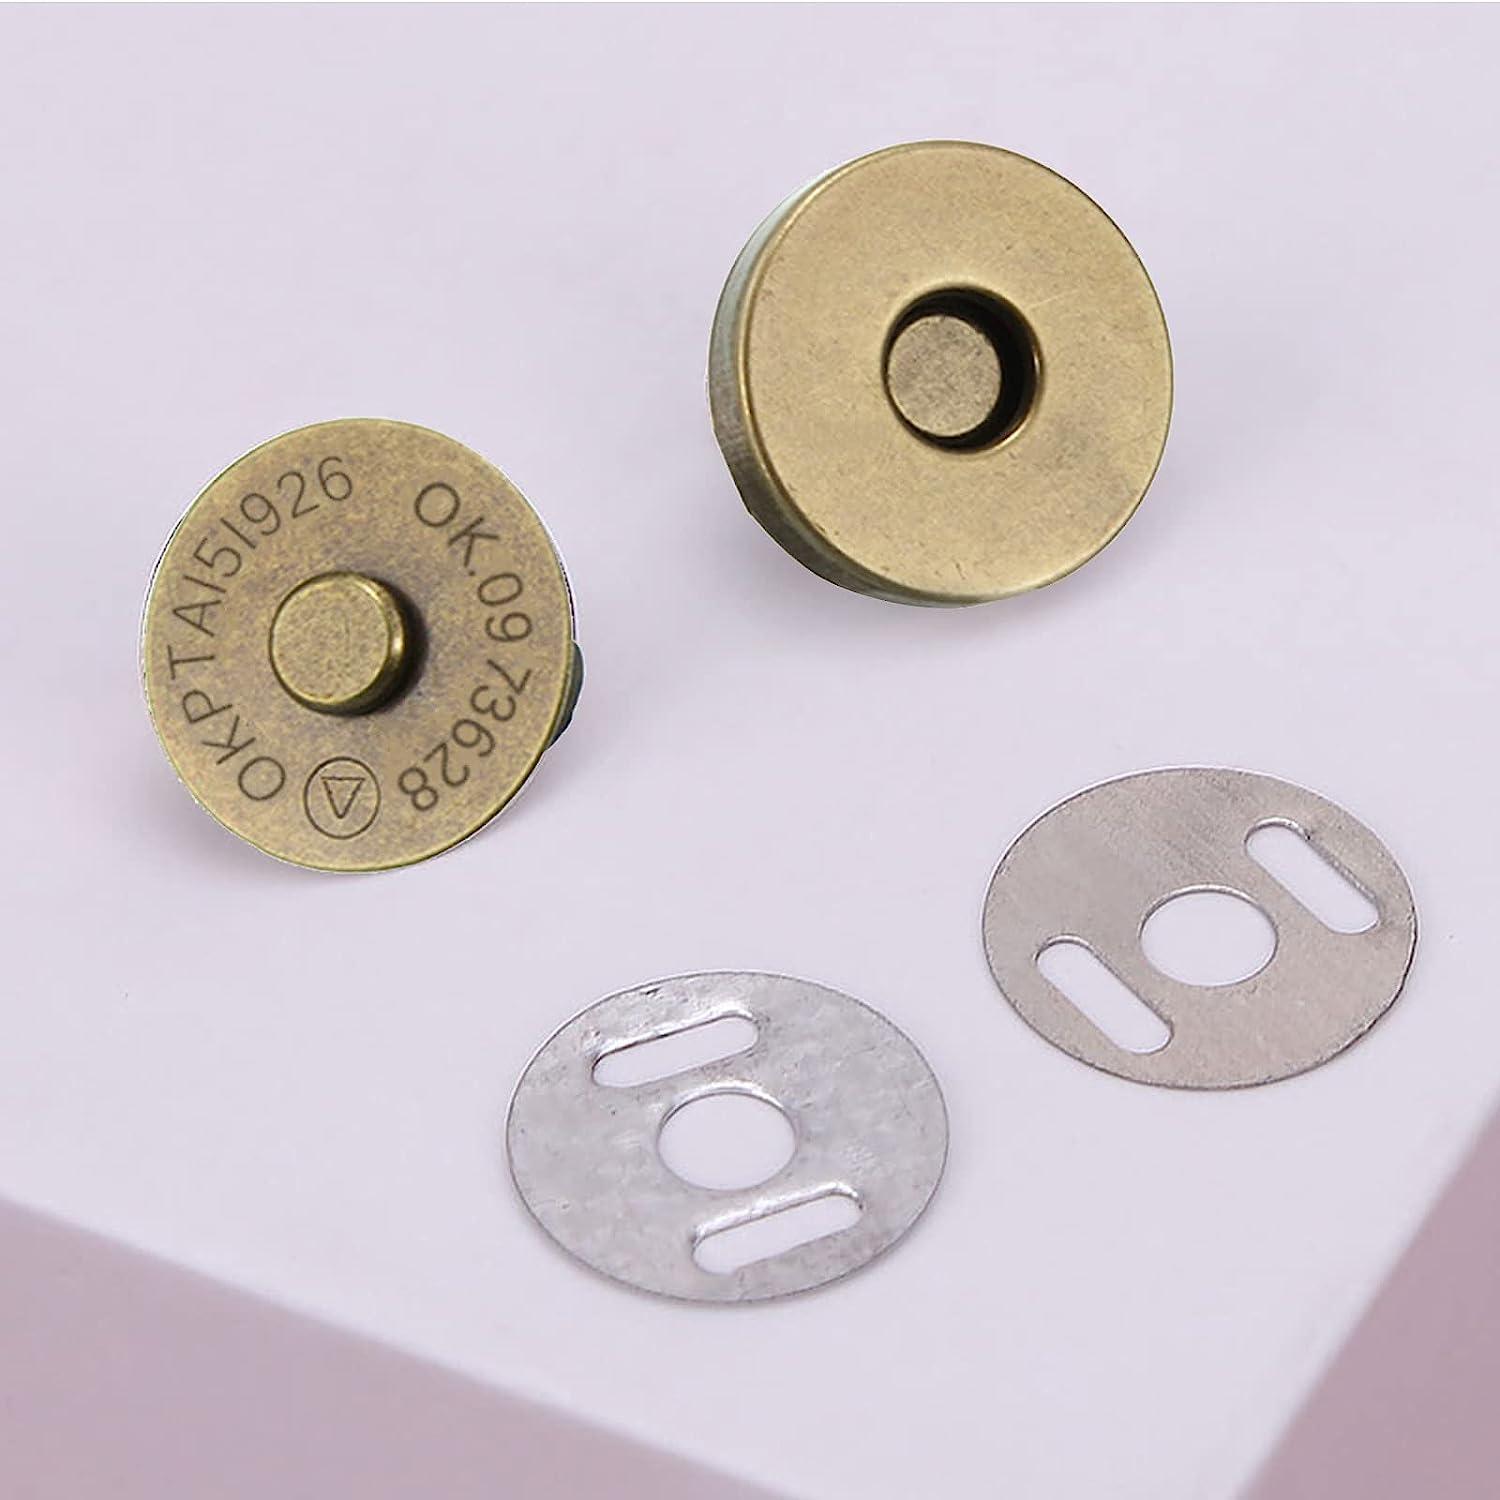 Magnetic Buttons, Magnet Fasteners, Magnetic Buckles, Jacket Fasteners